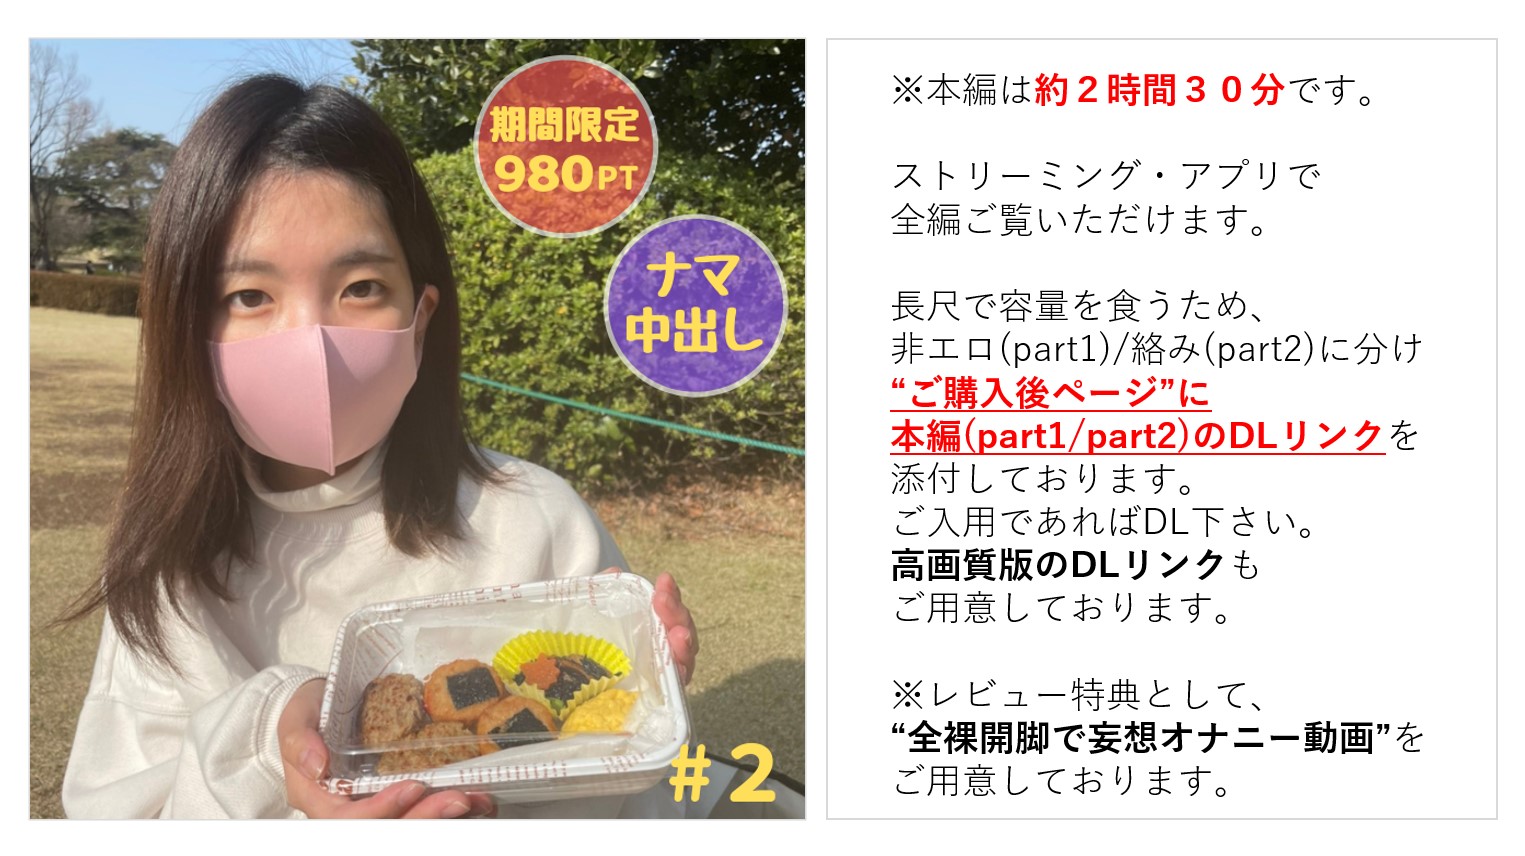 FC2 PPV 2819765 Pure naive daughter Mei-chan # 2 Handmade bento park date & clothes with favorite